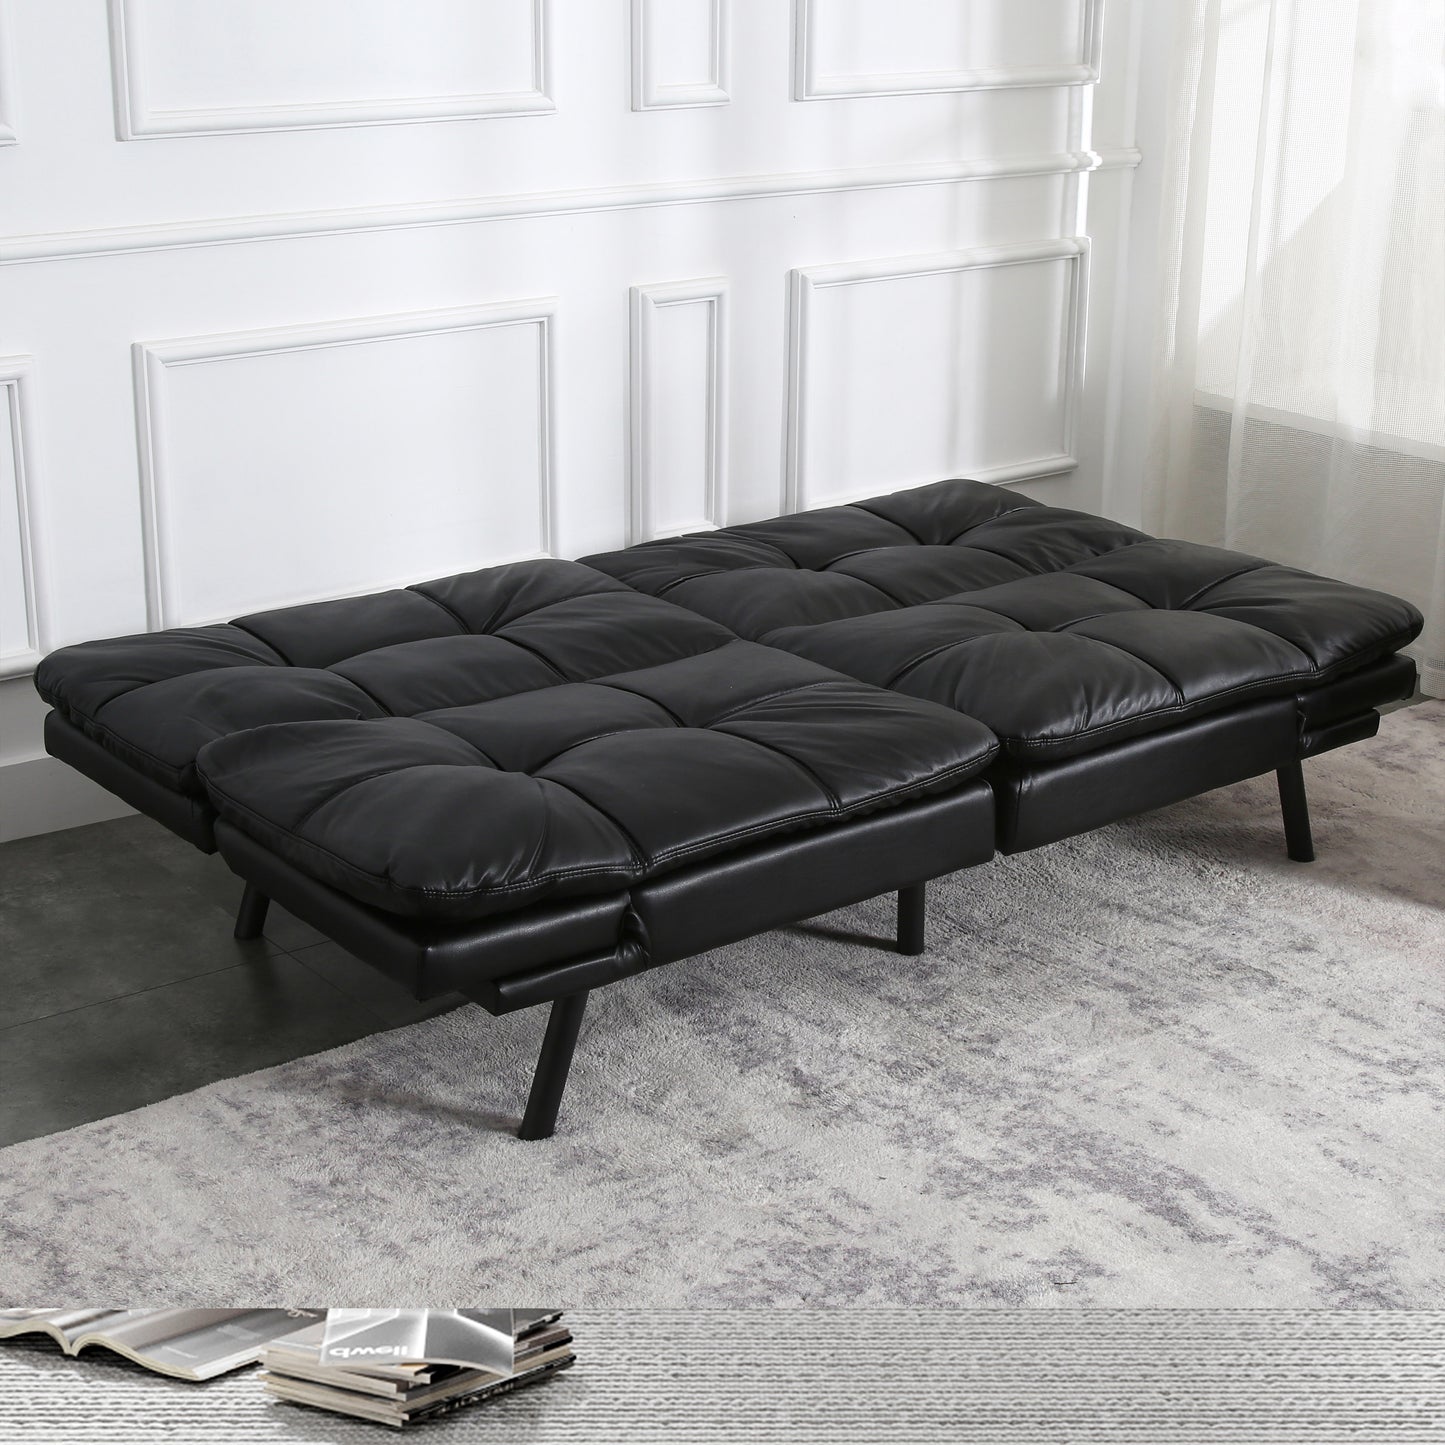 Convertible Memory Foam Sleeper Couch Bed Sofa Black